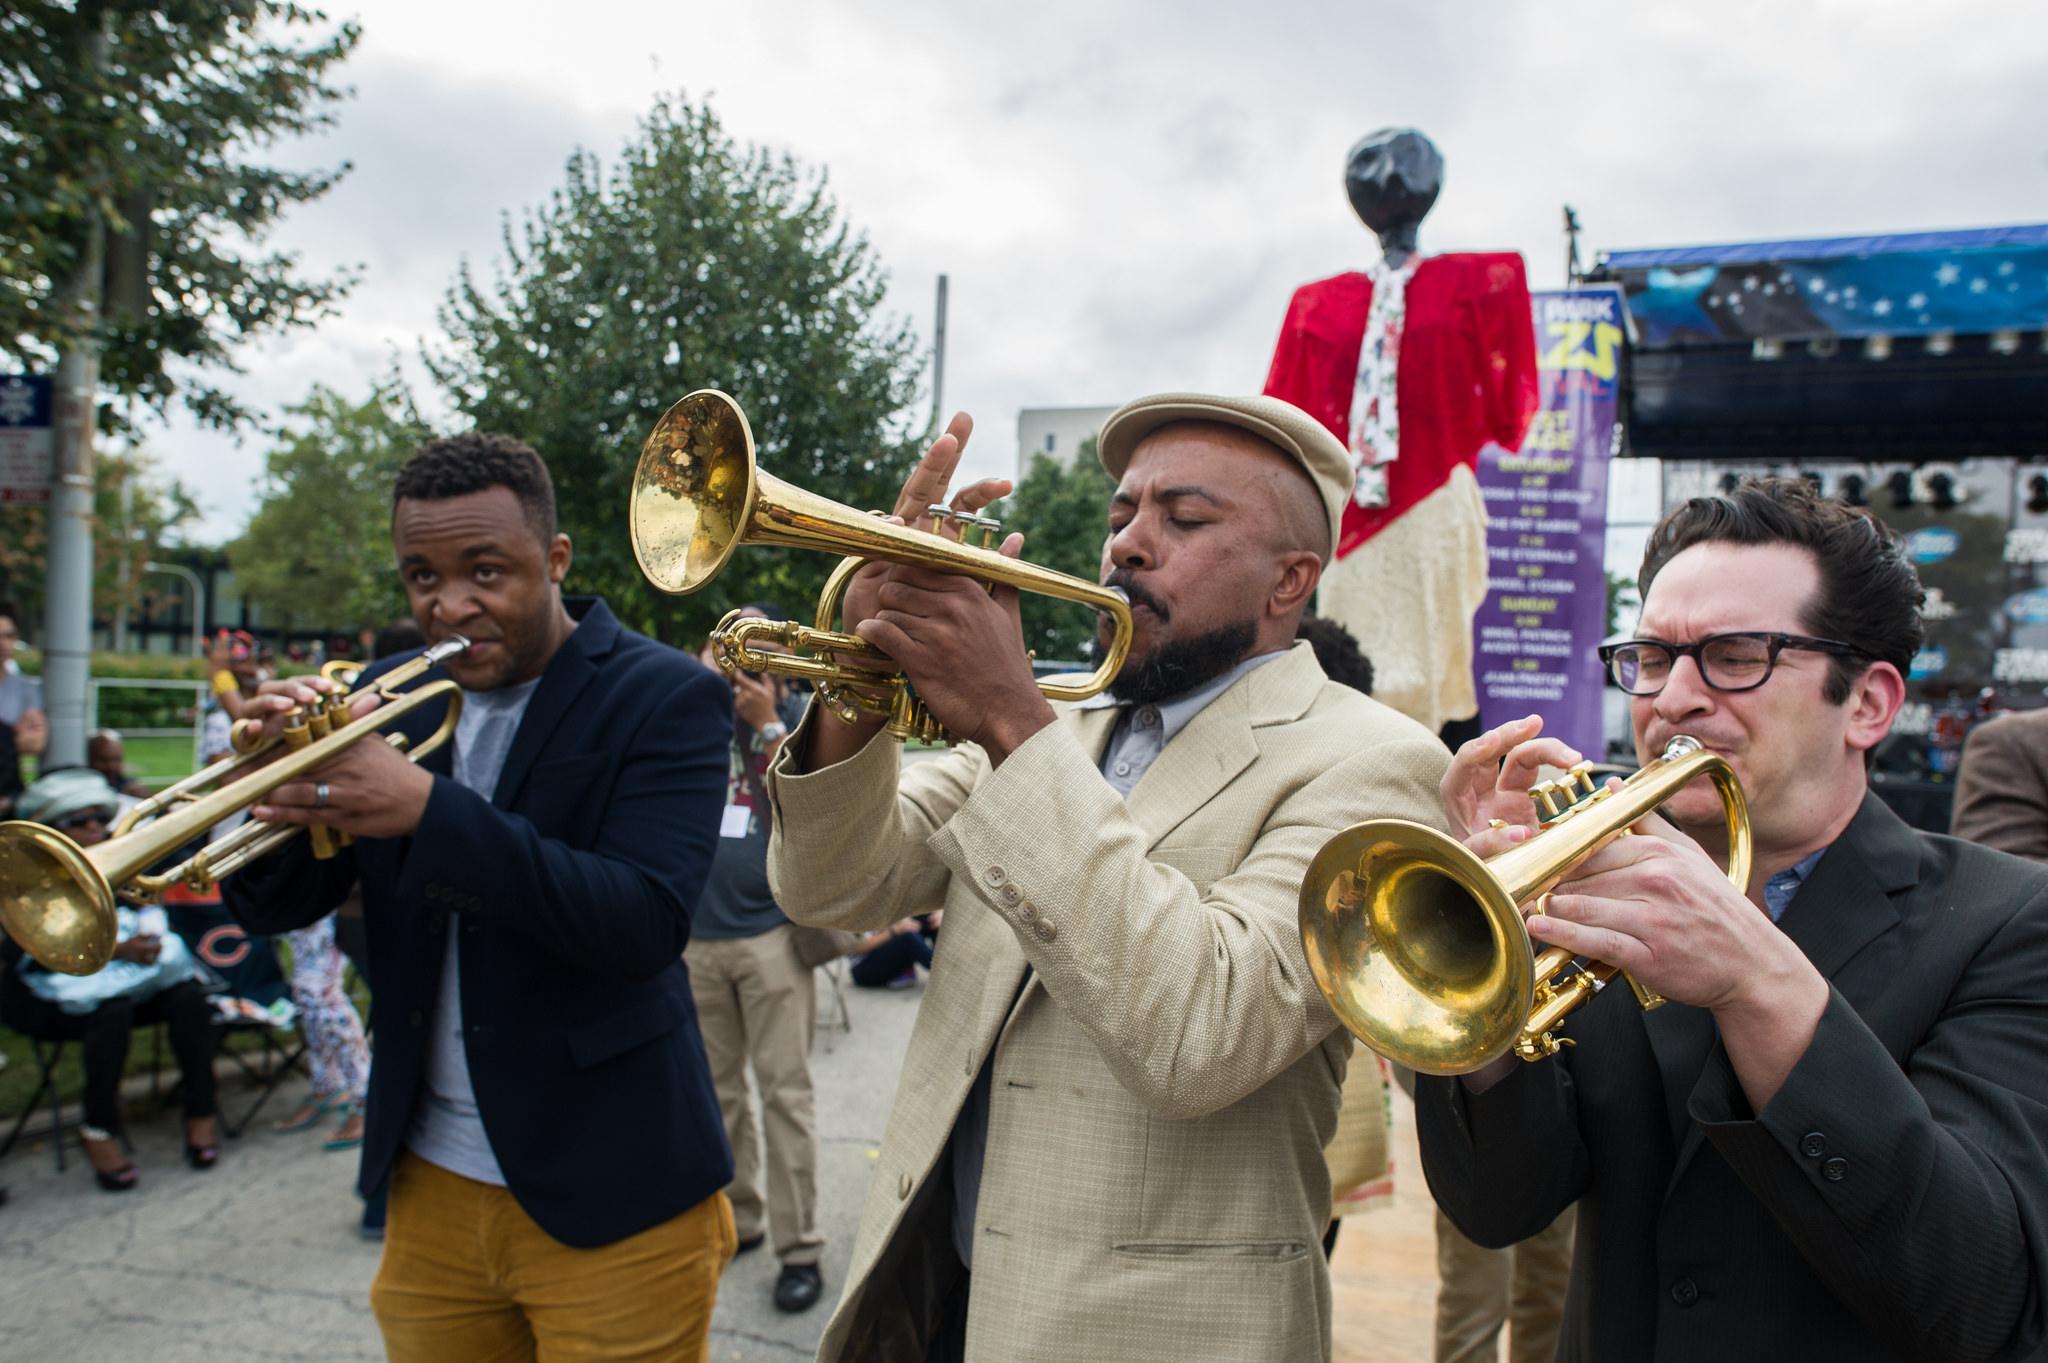 Sound the horns: The 10th annual Hyde Park Jazz Festival returns. (Marc Monaghan / Flickr)